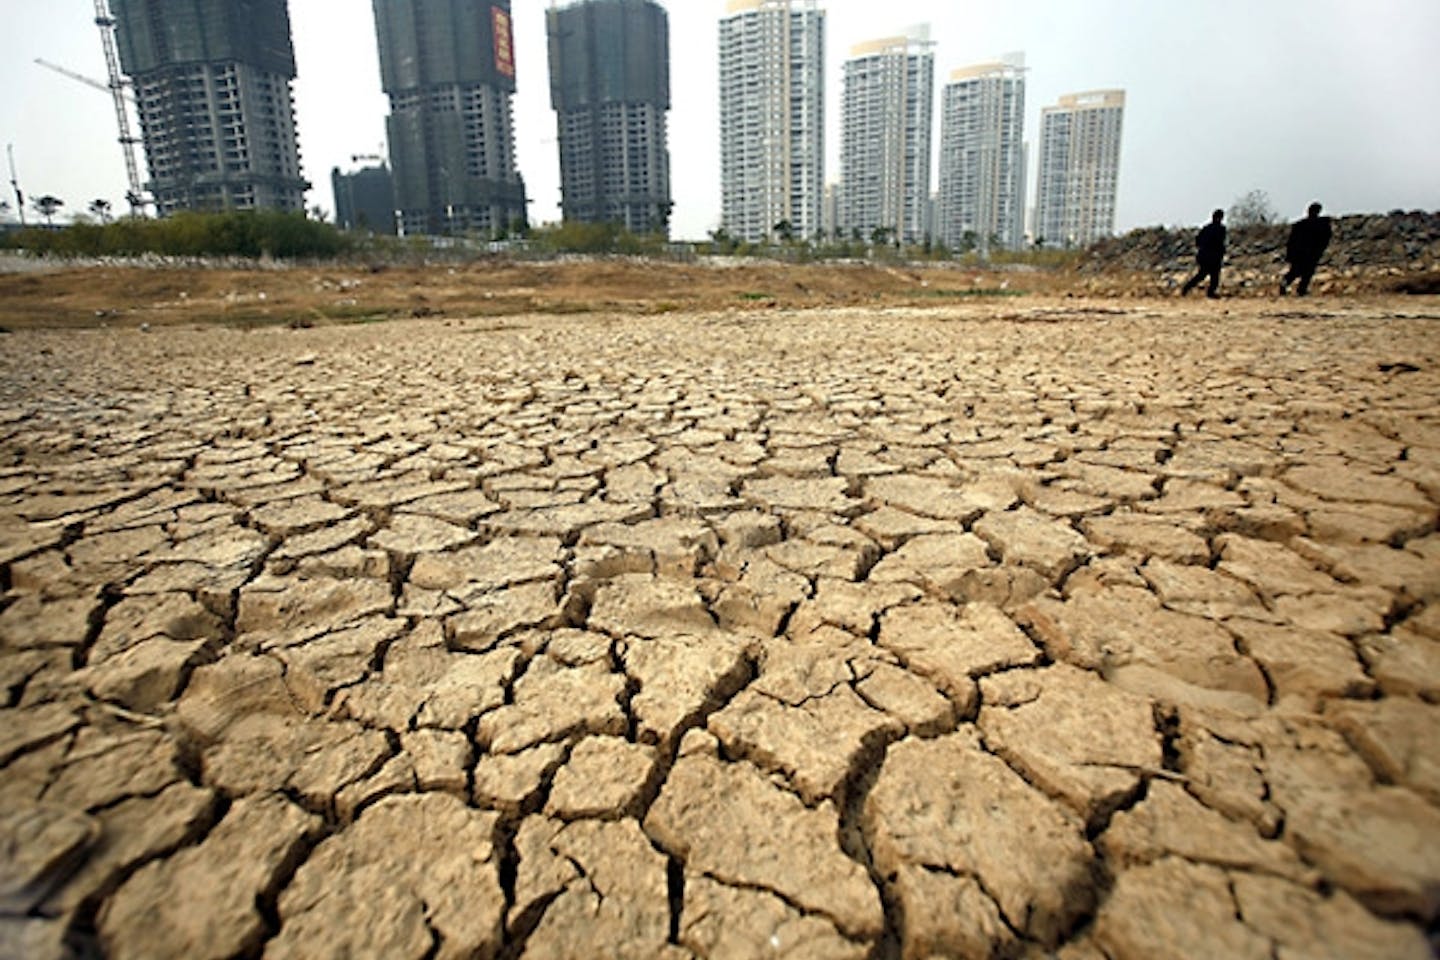 China Issues "Red Alert" as Nation's Largest Lake Runs Dry